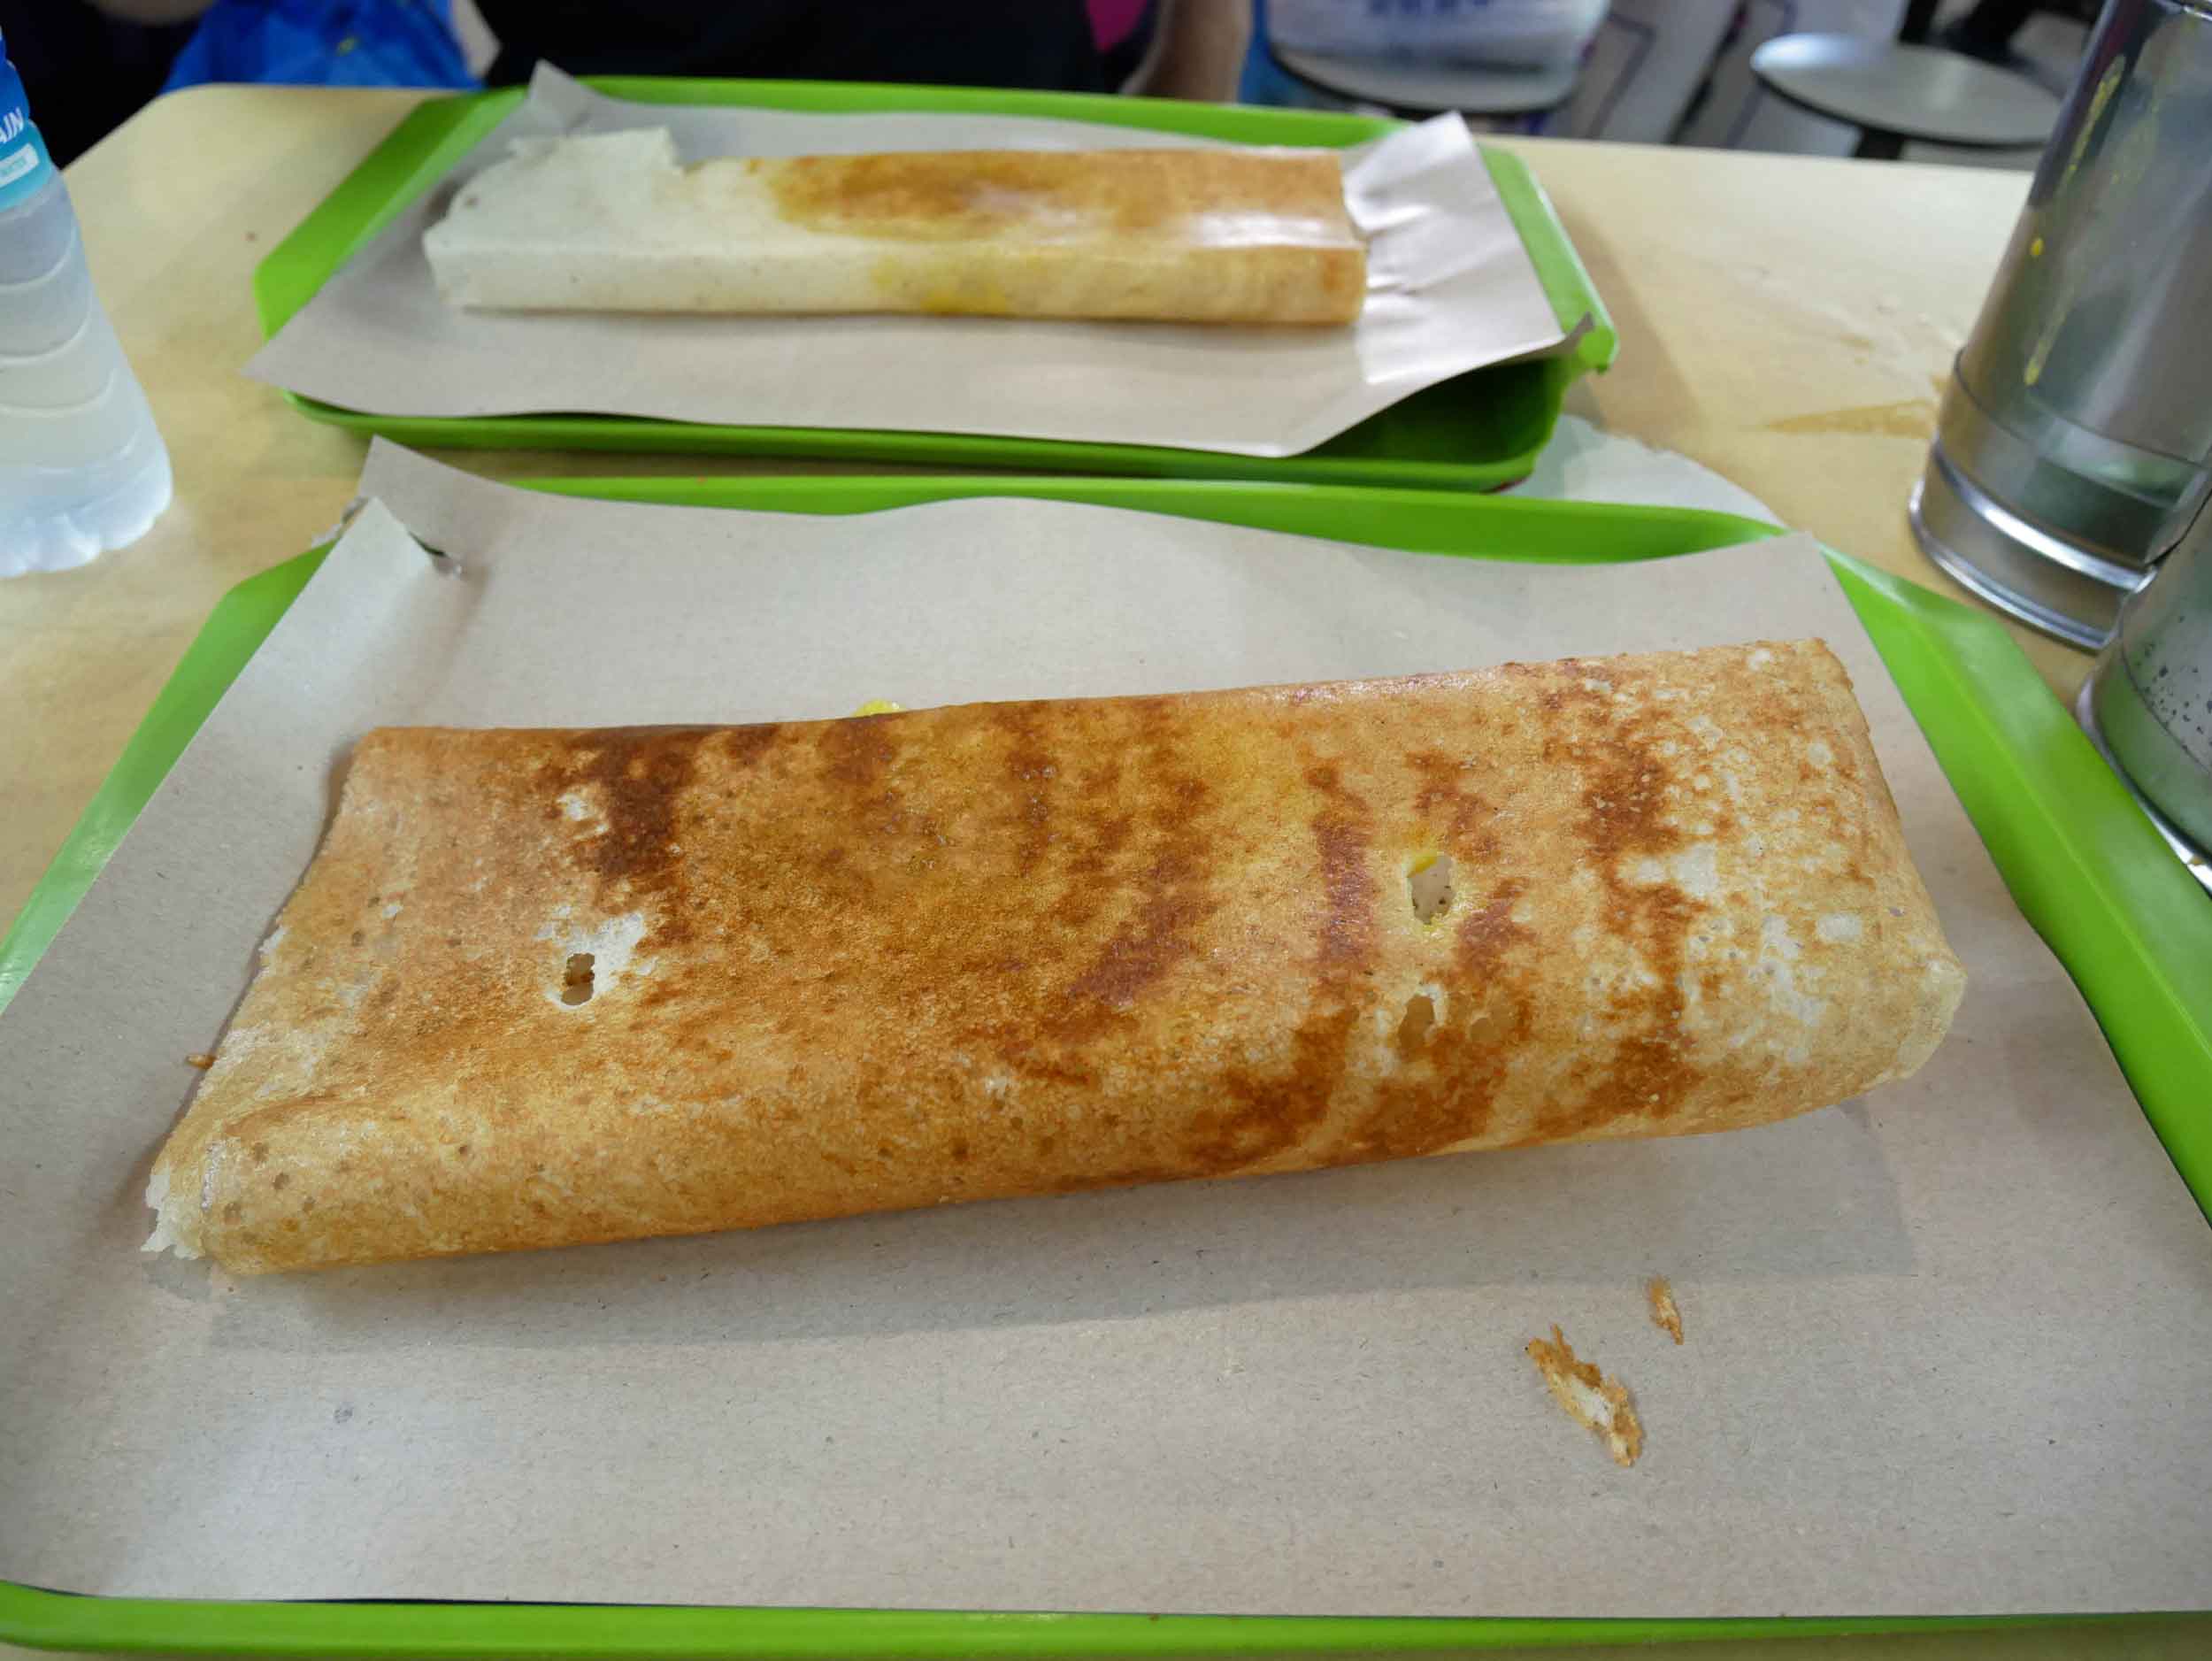  After a day of walking the Singapore streets, we were delighted by our filling masala dosas. 